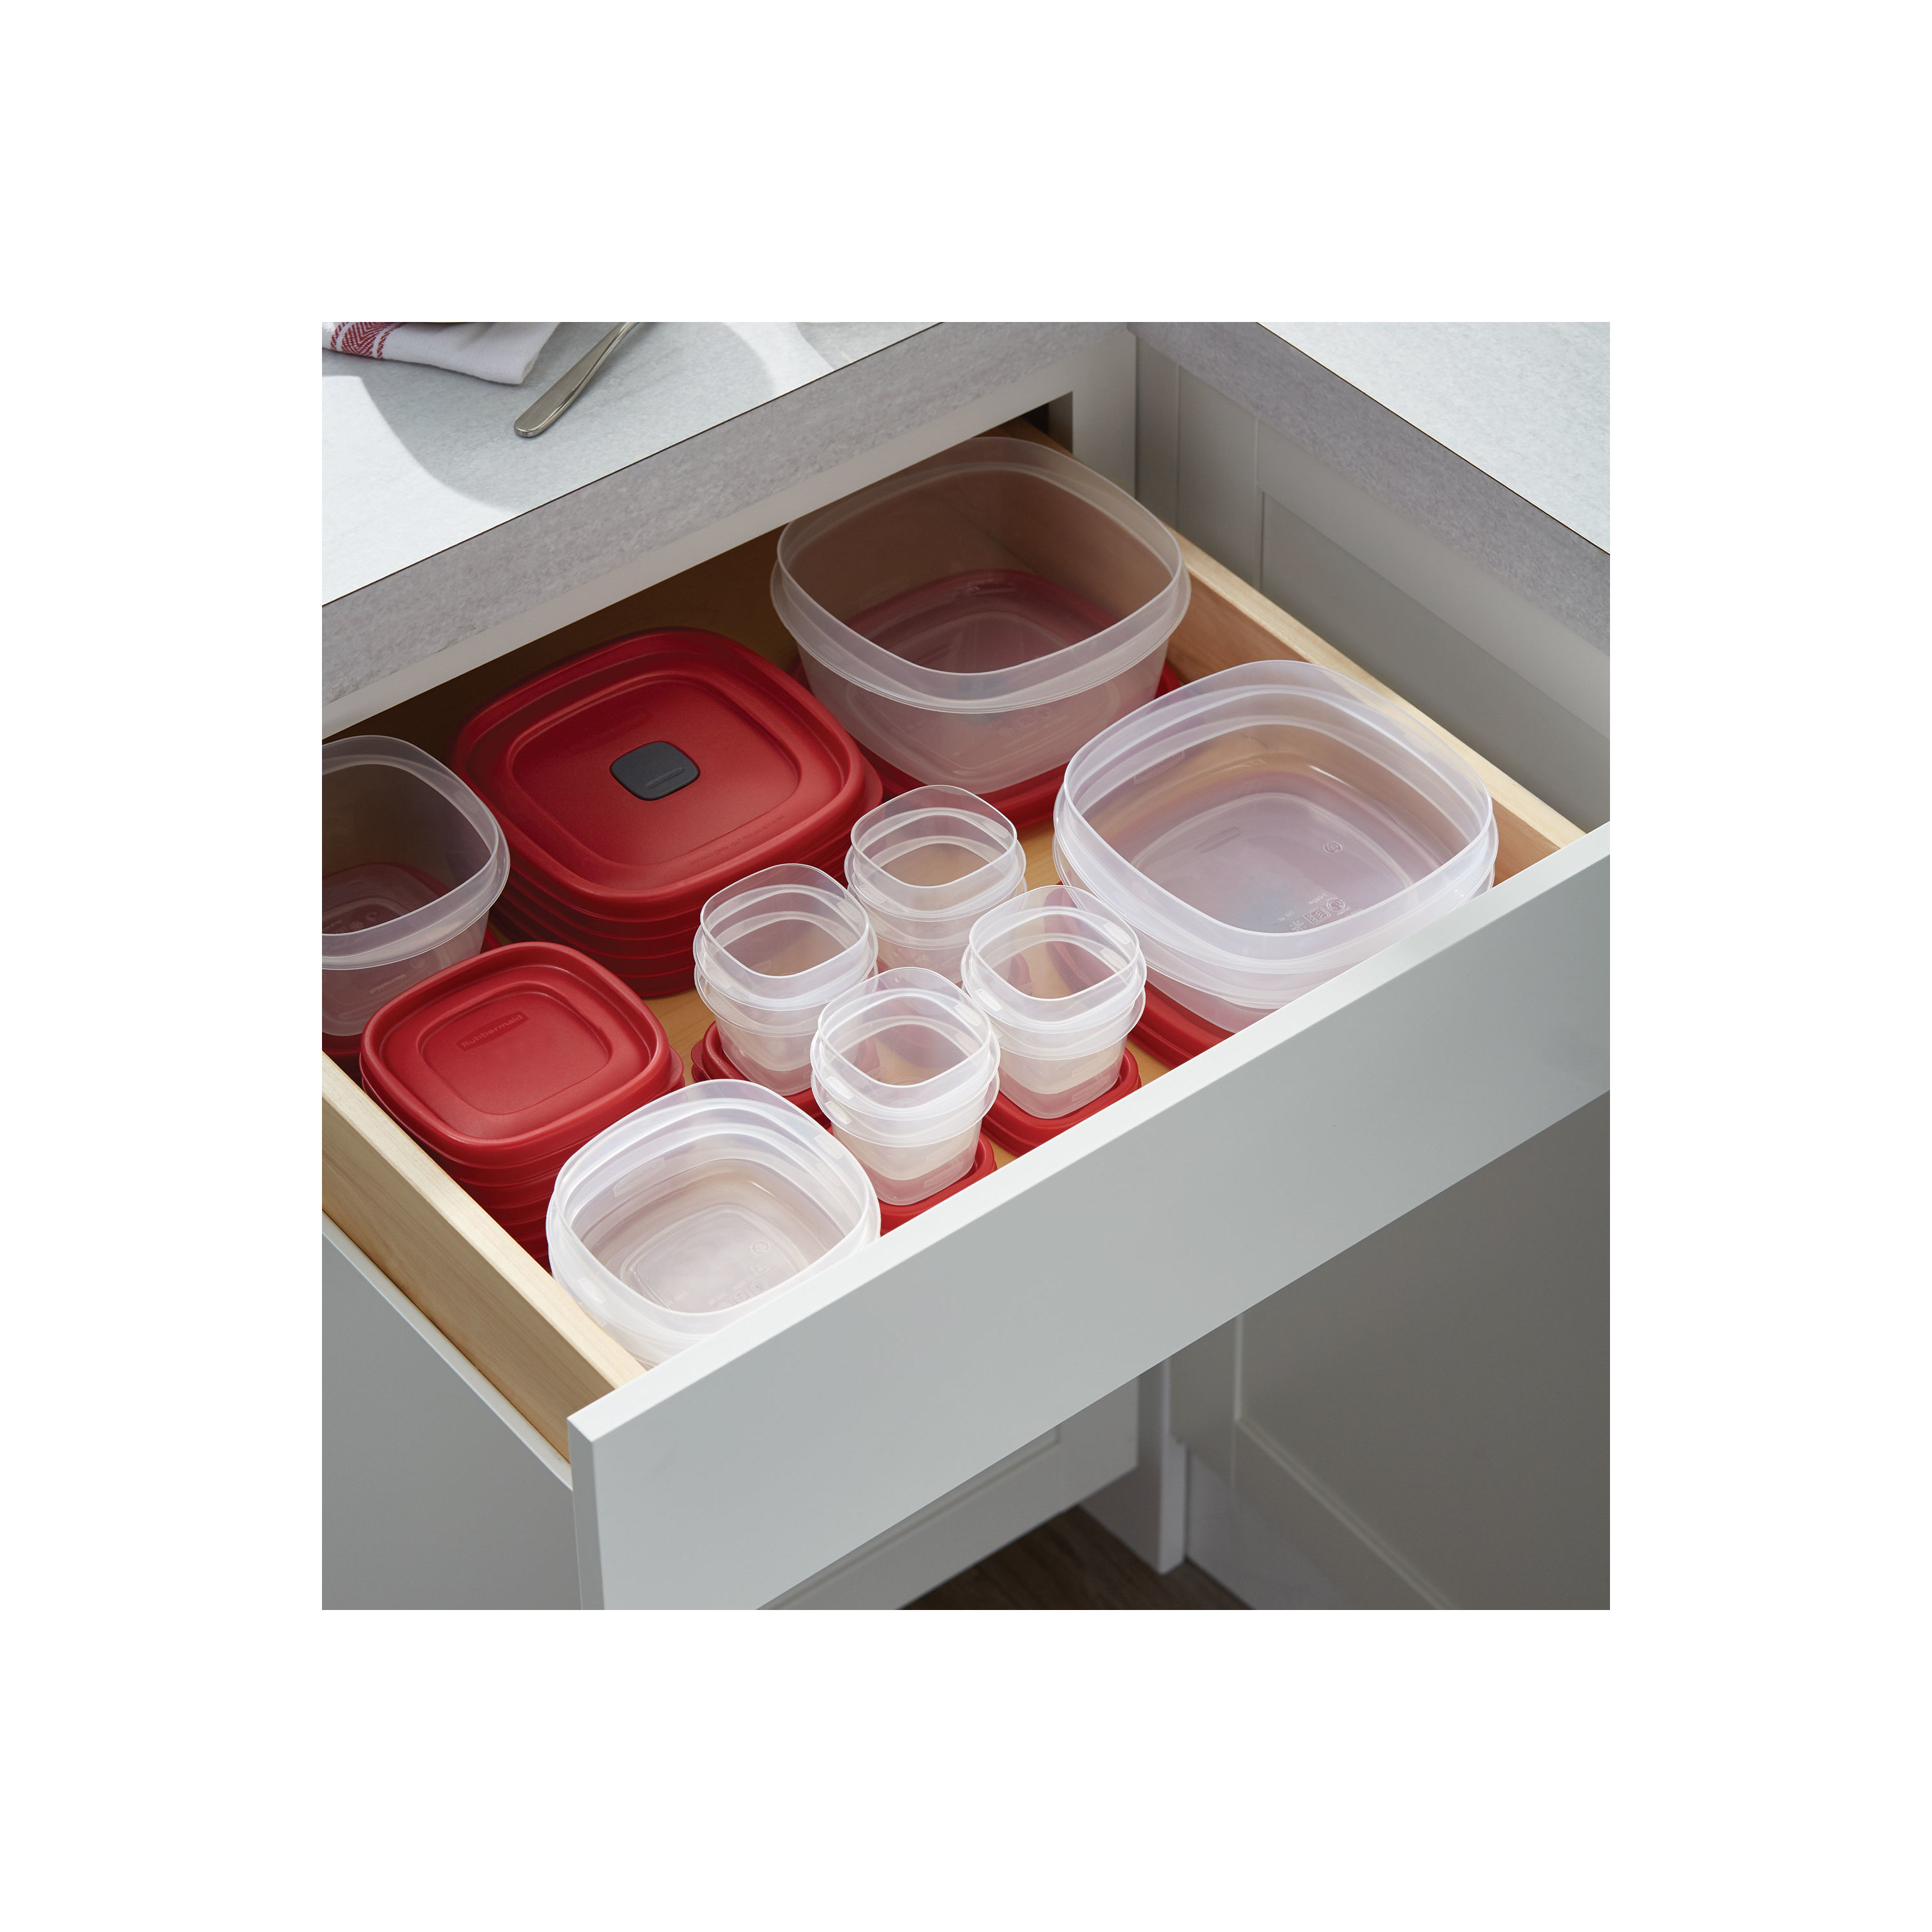 Rubbermaid EasyFindLids 26 Piece Plastic Food Storage Container Set with Vents, (39.5 Cup), Racer Red - image 2 of 9